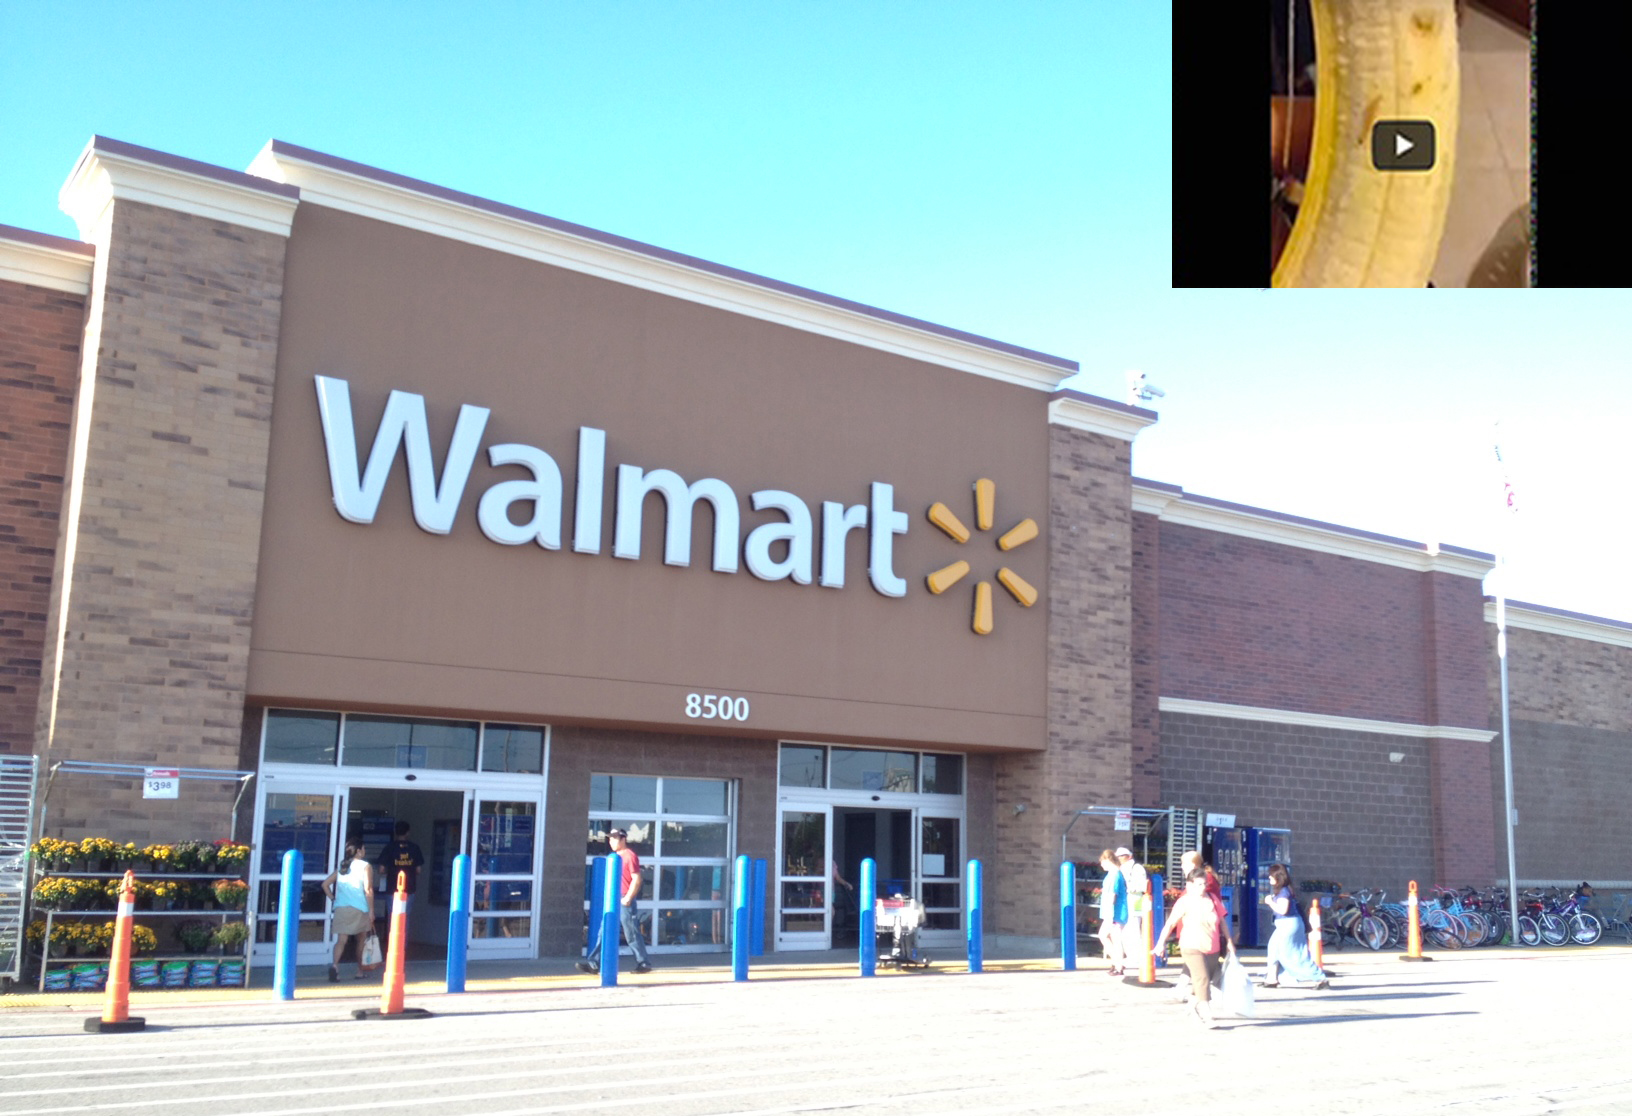 Wal-Mart Imported 6 tons of Parasite Infected Bananas